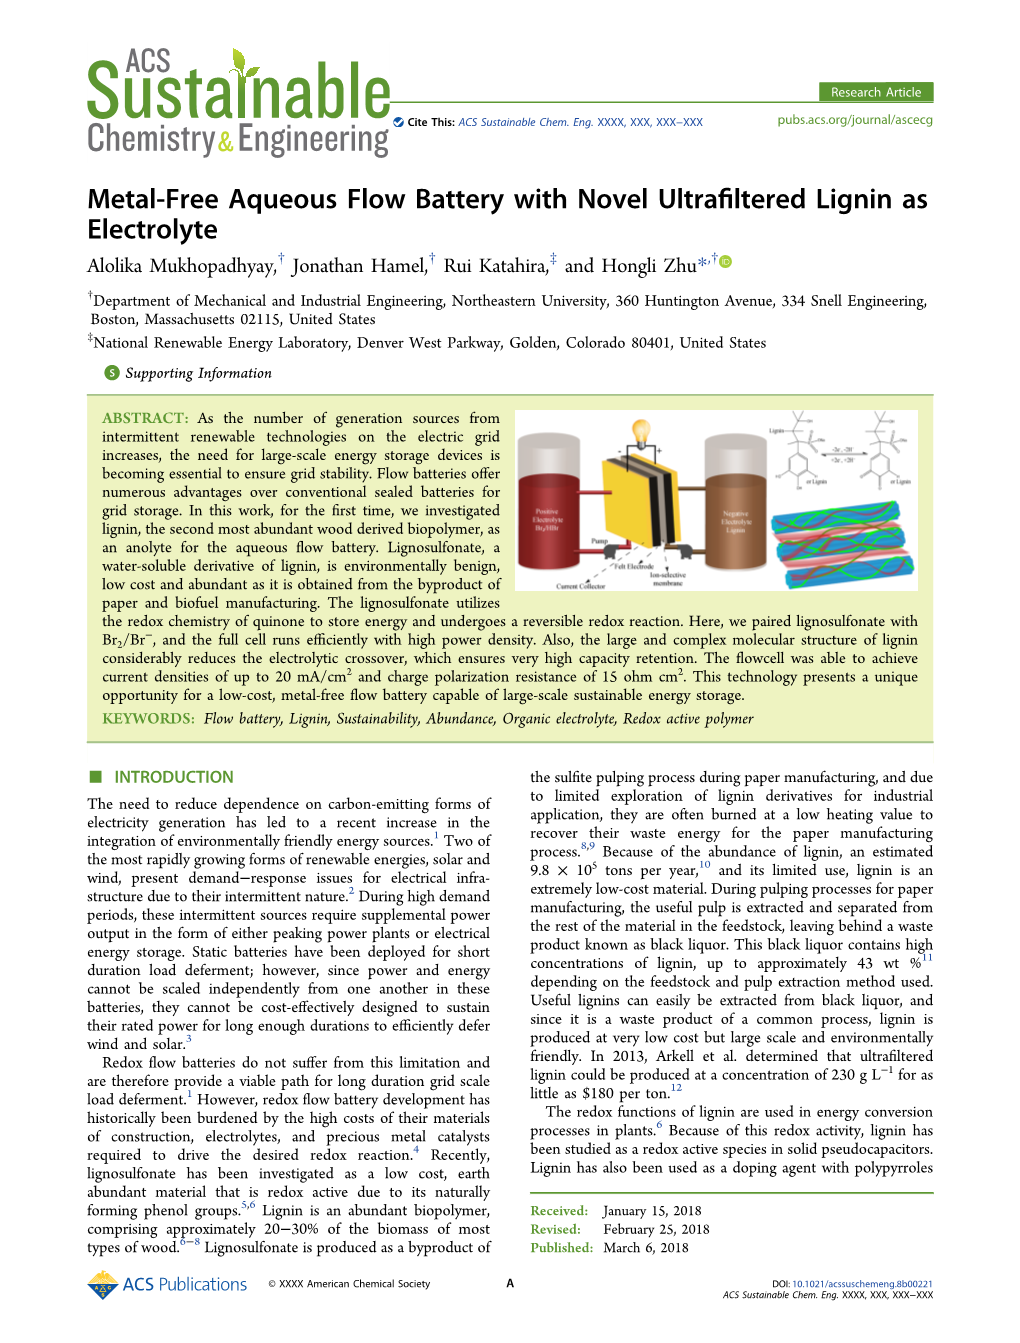 Metal-Free Aqueous Flow Battery with Novel Ultrafiltered Lignin As